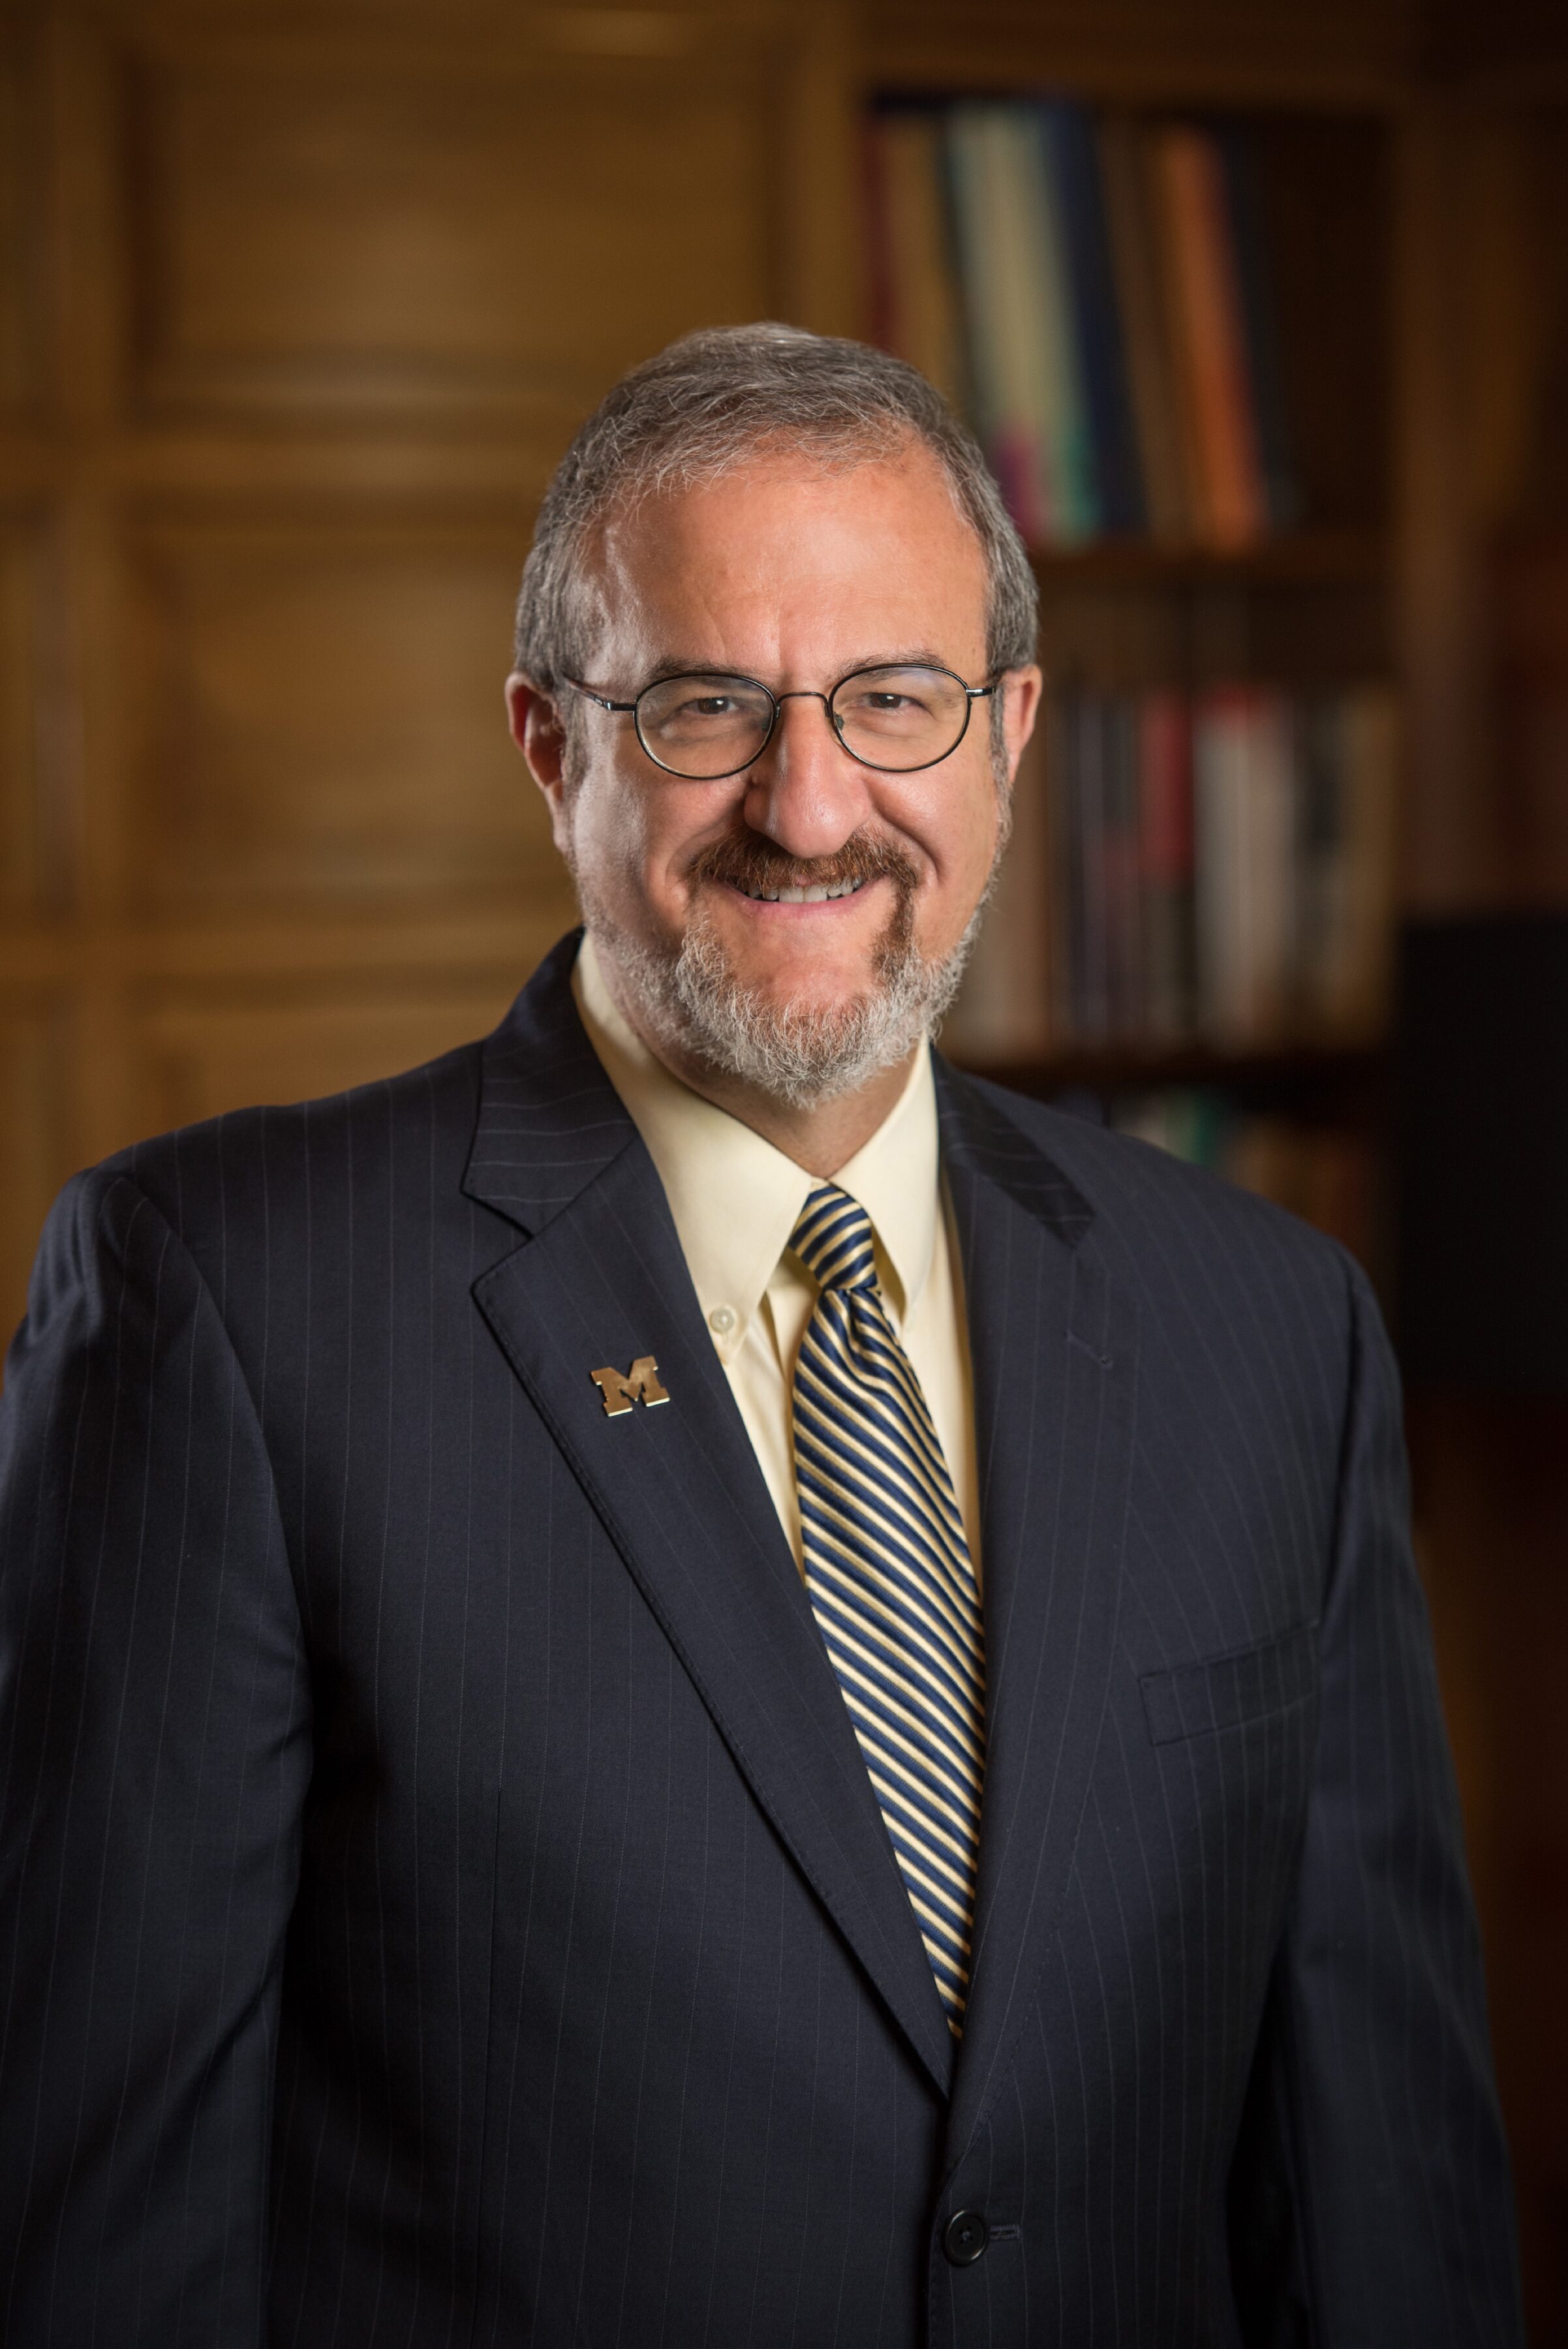 Schlissel Makes The Case For Public Investments